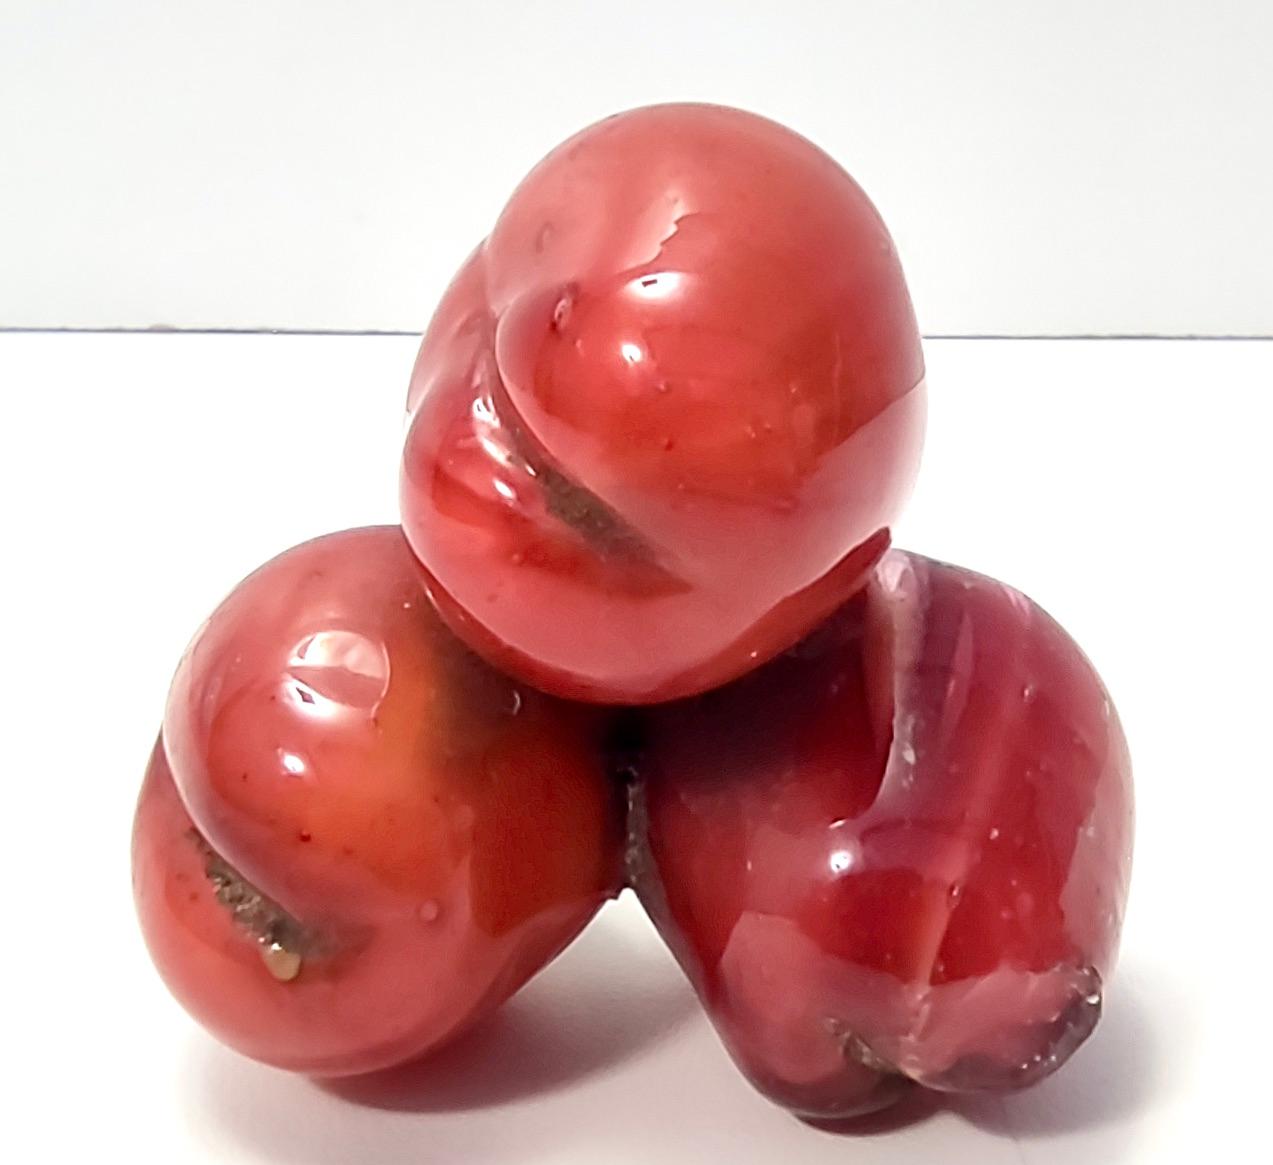 Vintage Murano Glass Decorative Item of Cherries by Martinuzzi for Venini, Italy In Excellent Condition For Sale In Bresso, Lombardy